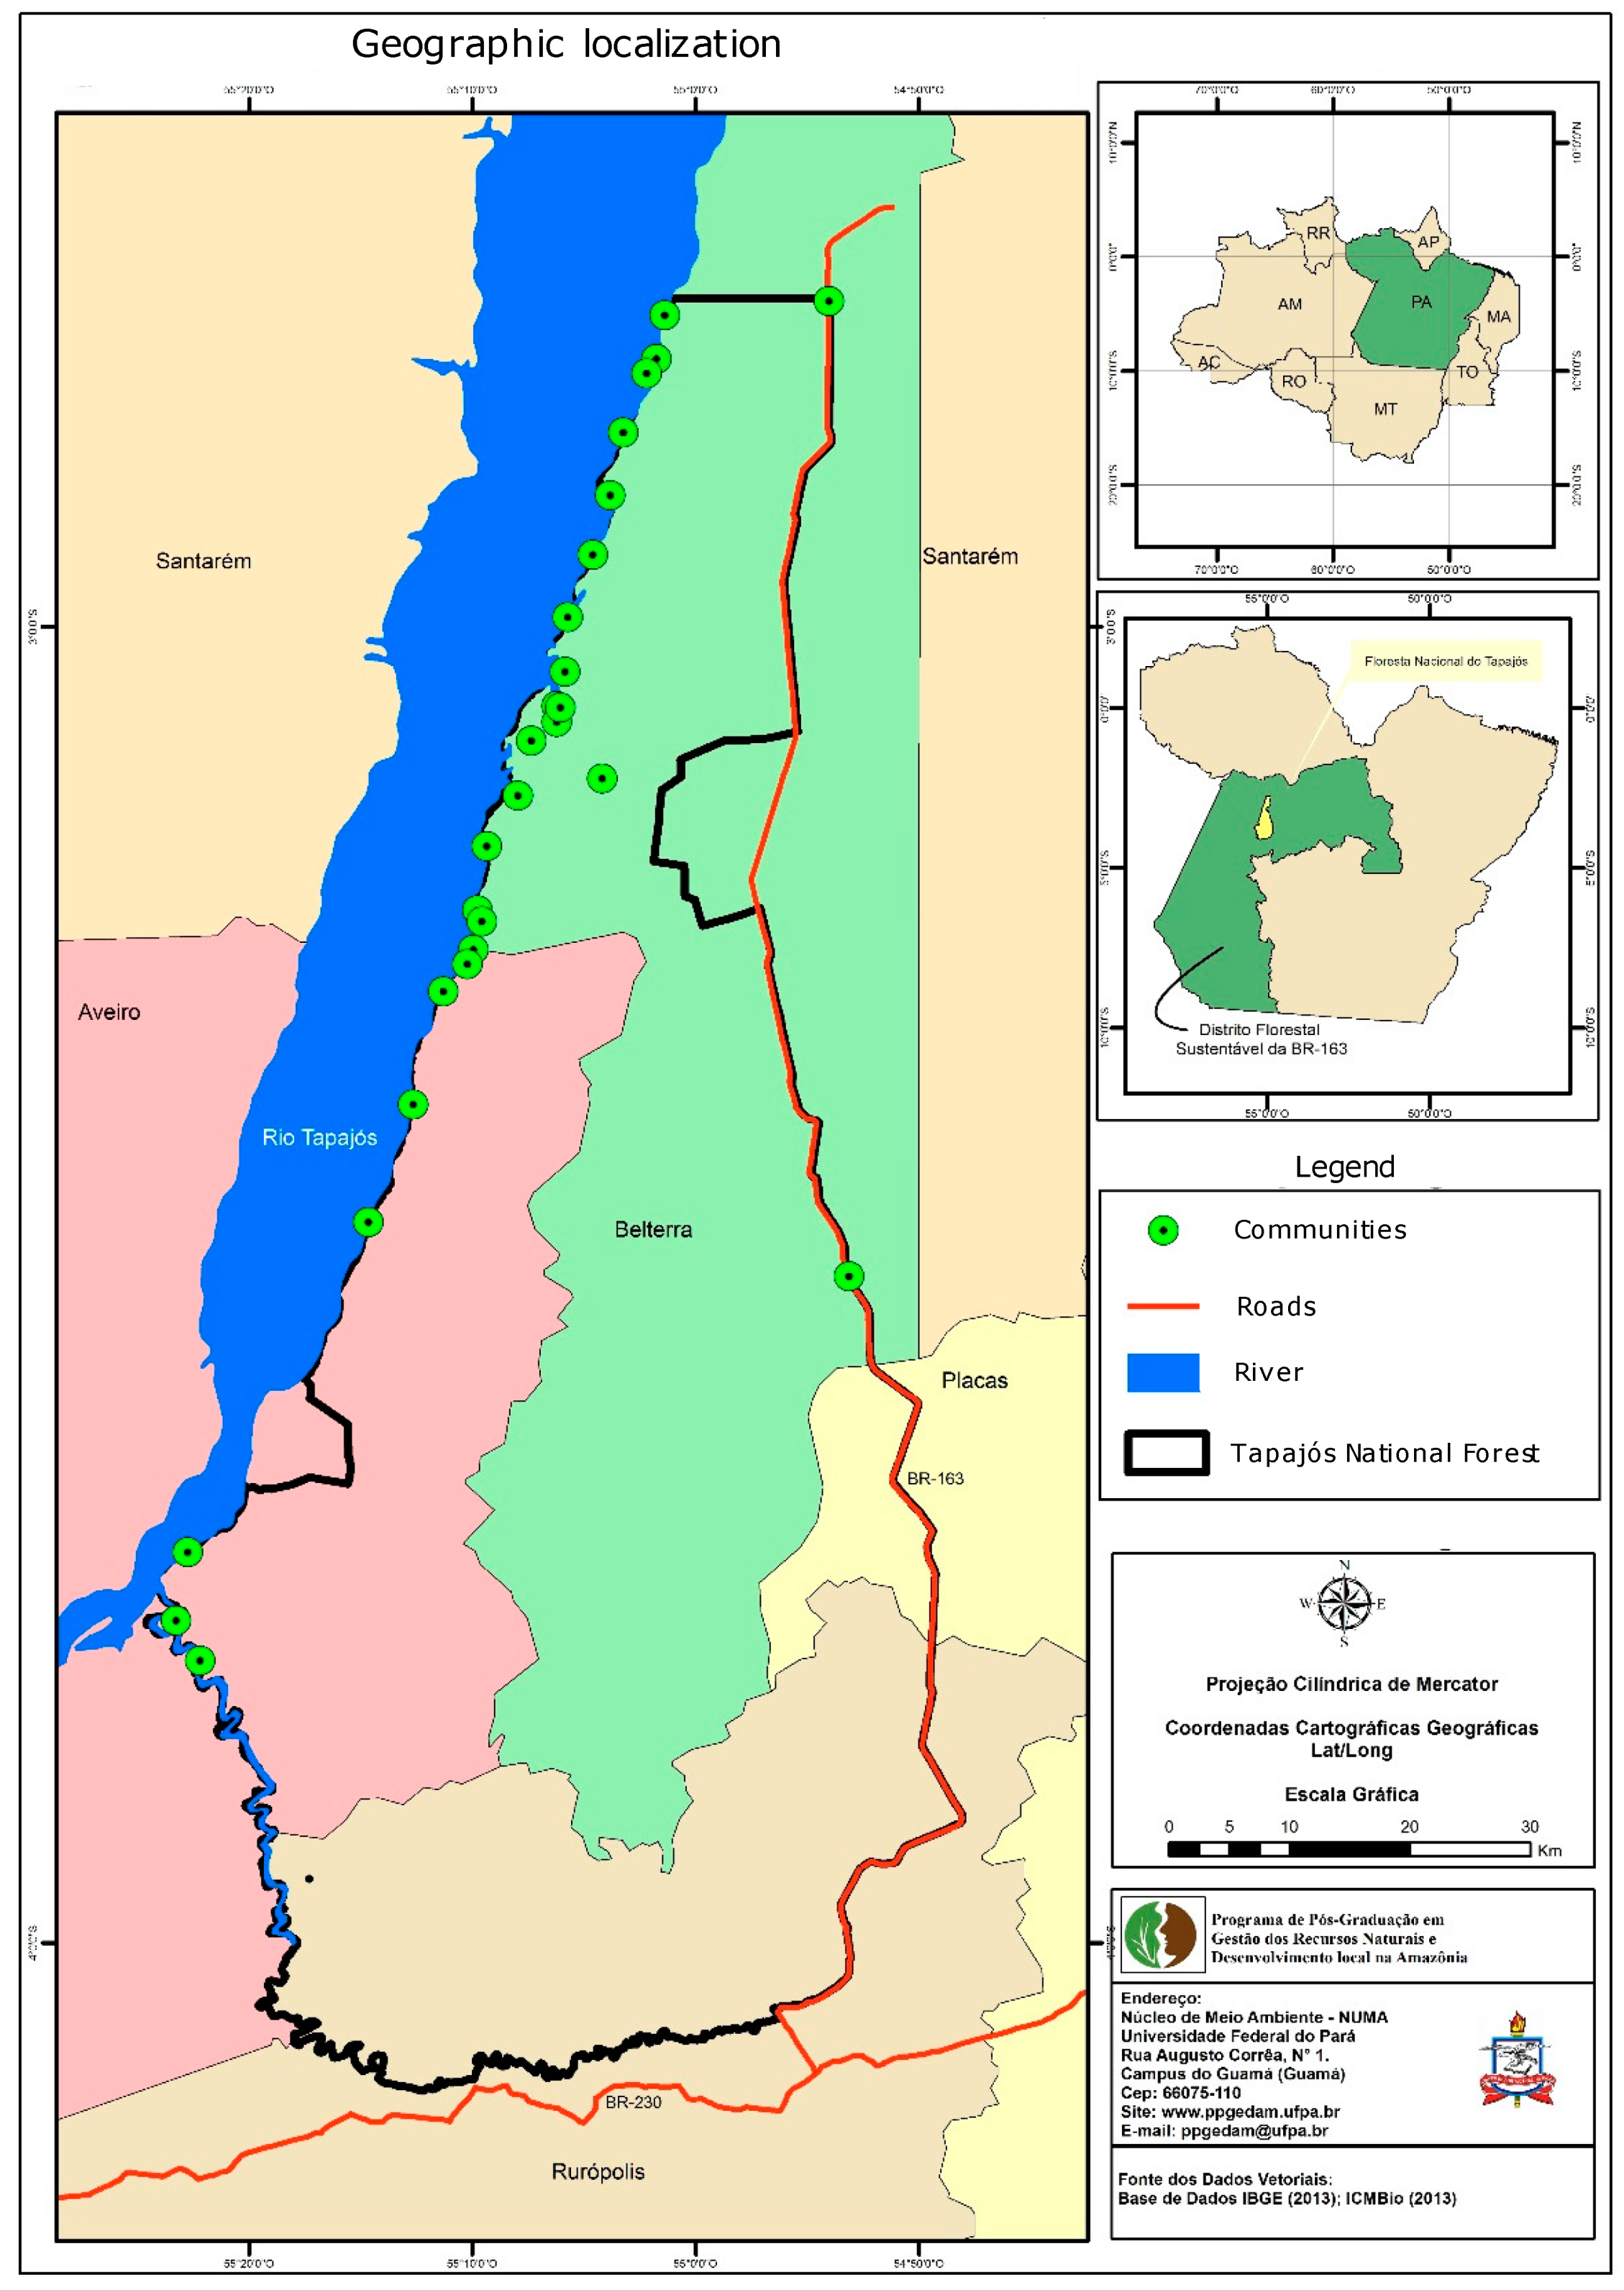 Forests | Free Full-Text | Logging Community-Based Forests in the Amazon:  An Analysis of External Influences, Multi-Partner Governance, and Resilience